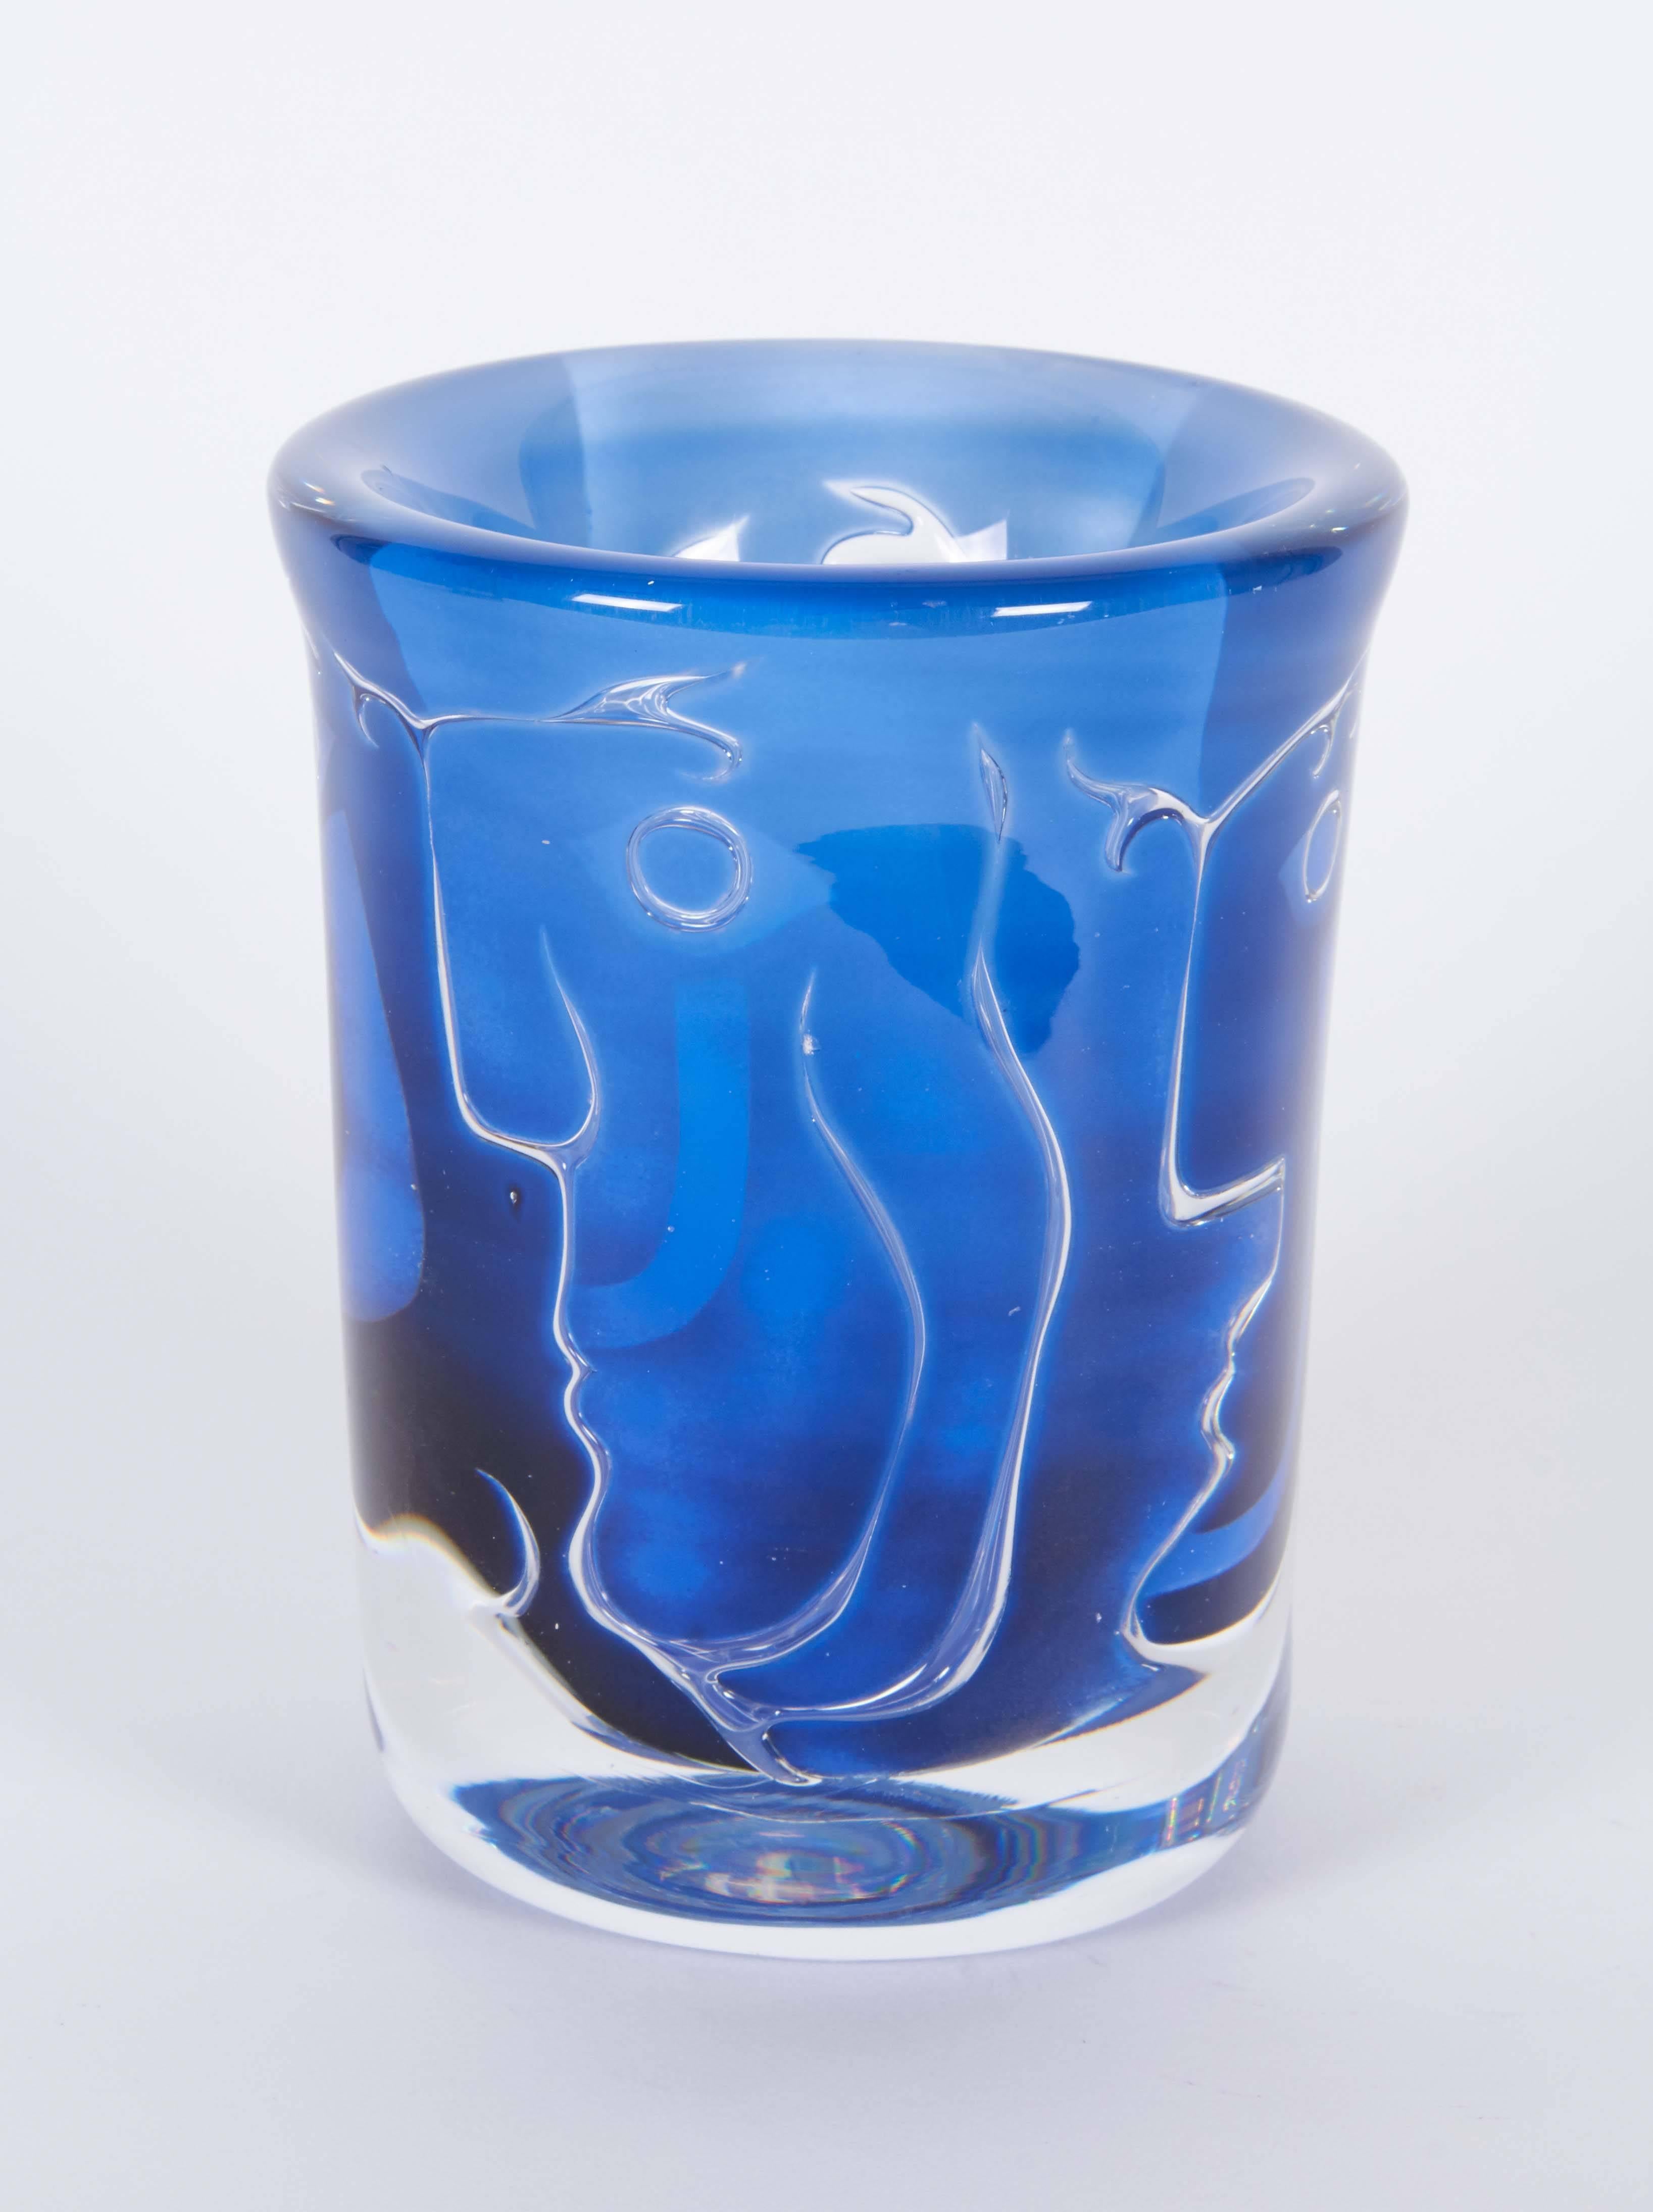 An Orrefors 'Ariel' vase by Ingeborg Lundin, produced circa 1960s, in cobalt blue, cased within a clear layer, detailing abstract faces in profile. Markings include [Orrefors/ Ariel No. 397 - E7/ Ingeborg Lundin], etched to the bottom. Very good